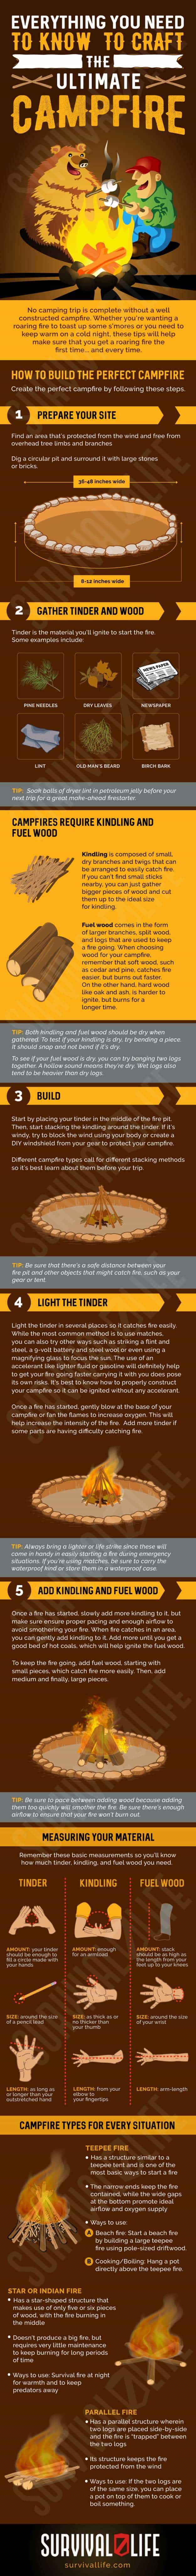 Infographic | Campfire Infographic | How To Build The Perfect Campfire